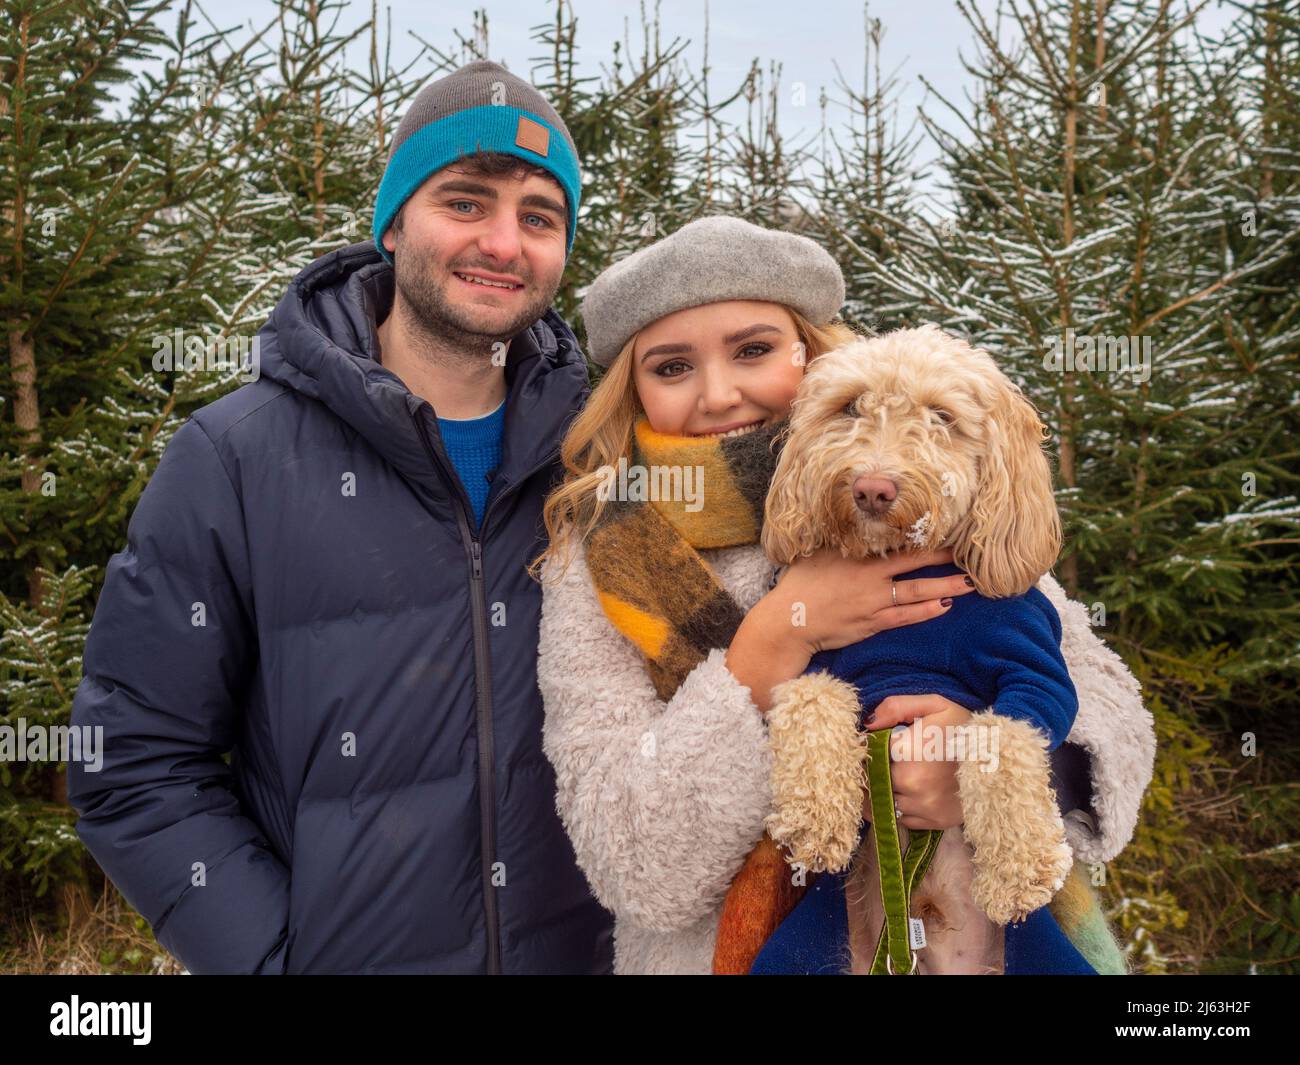 Young caucasian man and woman, holding a dog, standing in front of snow covered Christmas trees at a North Yorkshire Christmas tree farm. UK. Stock Photo